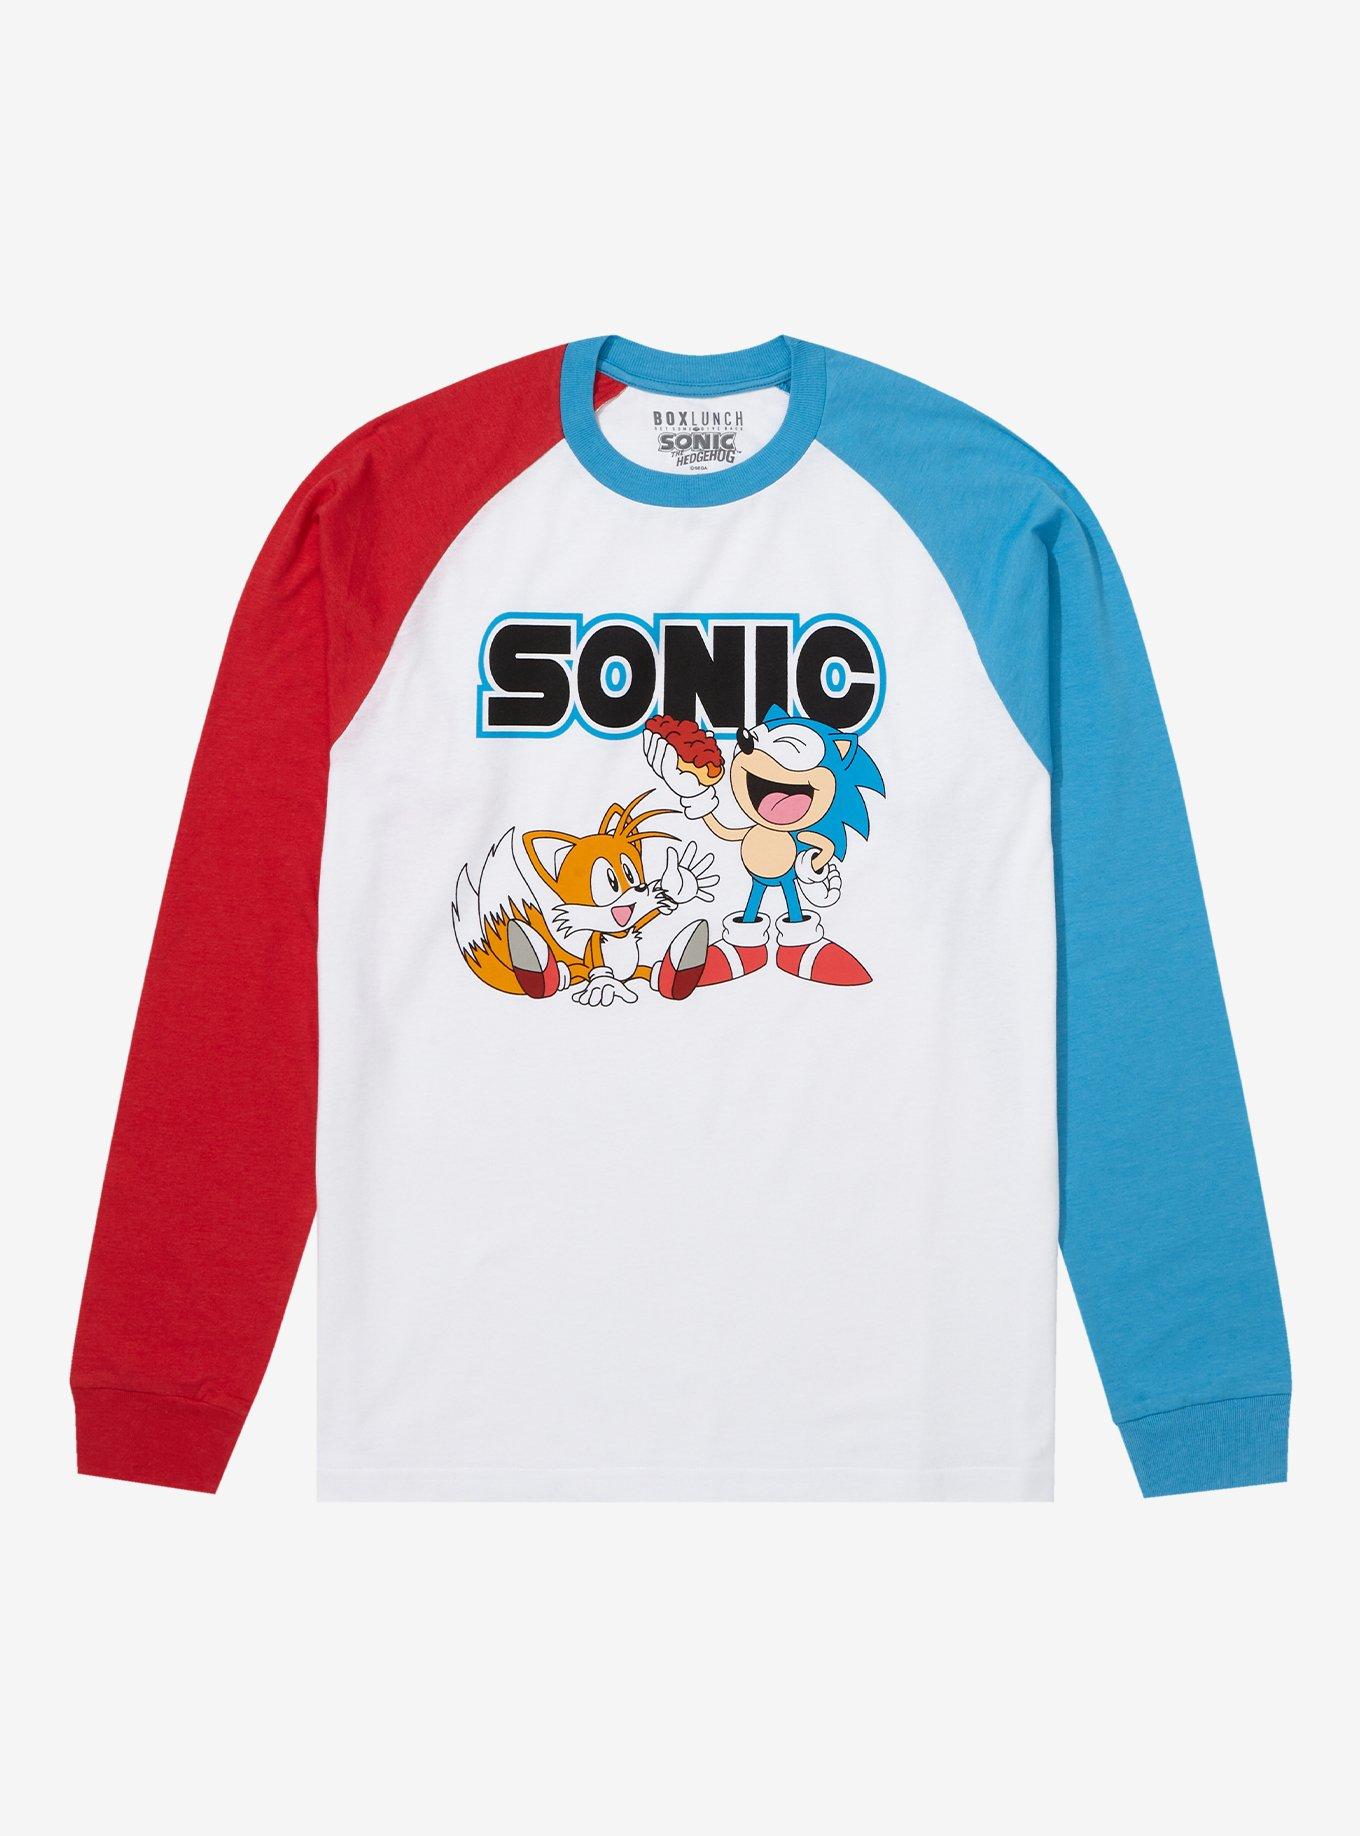 Sonic the Hedgehog Motocross Jersey - BoxLunch Exclusive